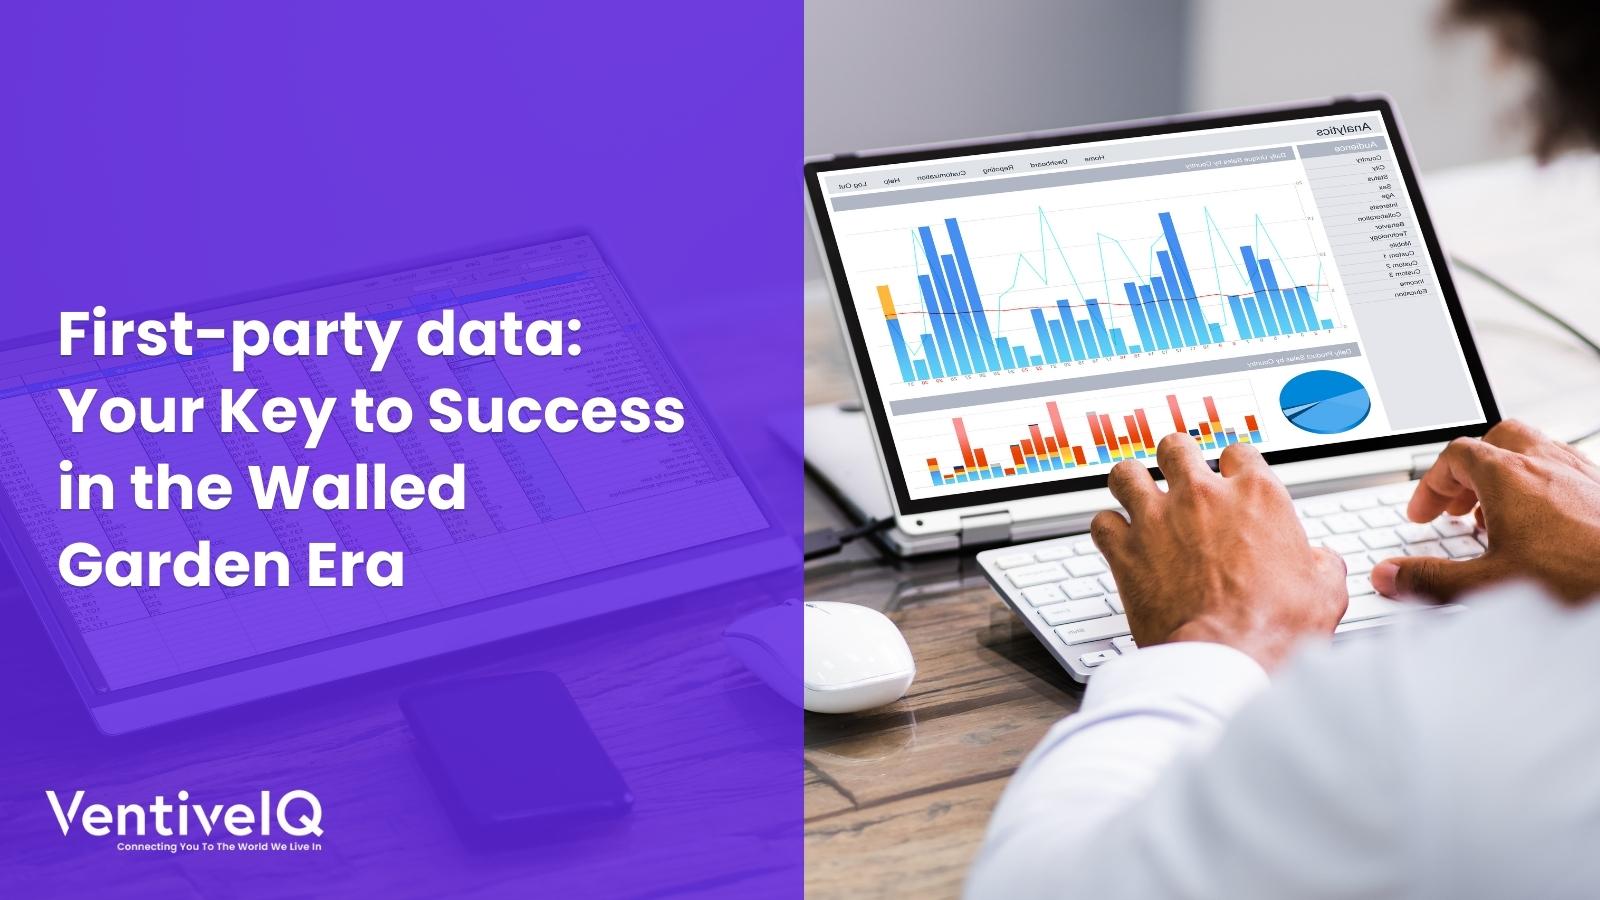 First-party data: Your Key to Success in the Walled Garden Era